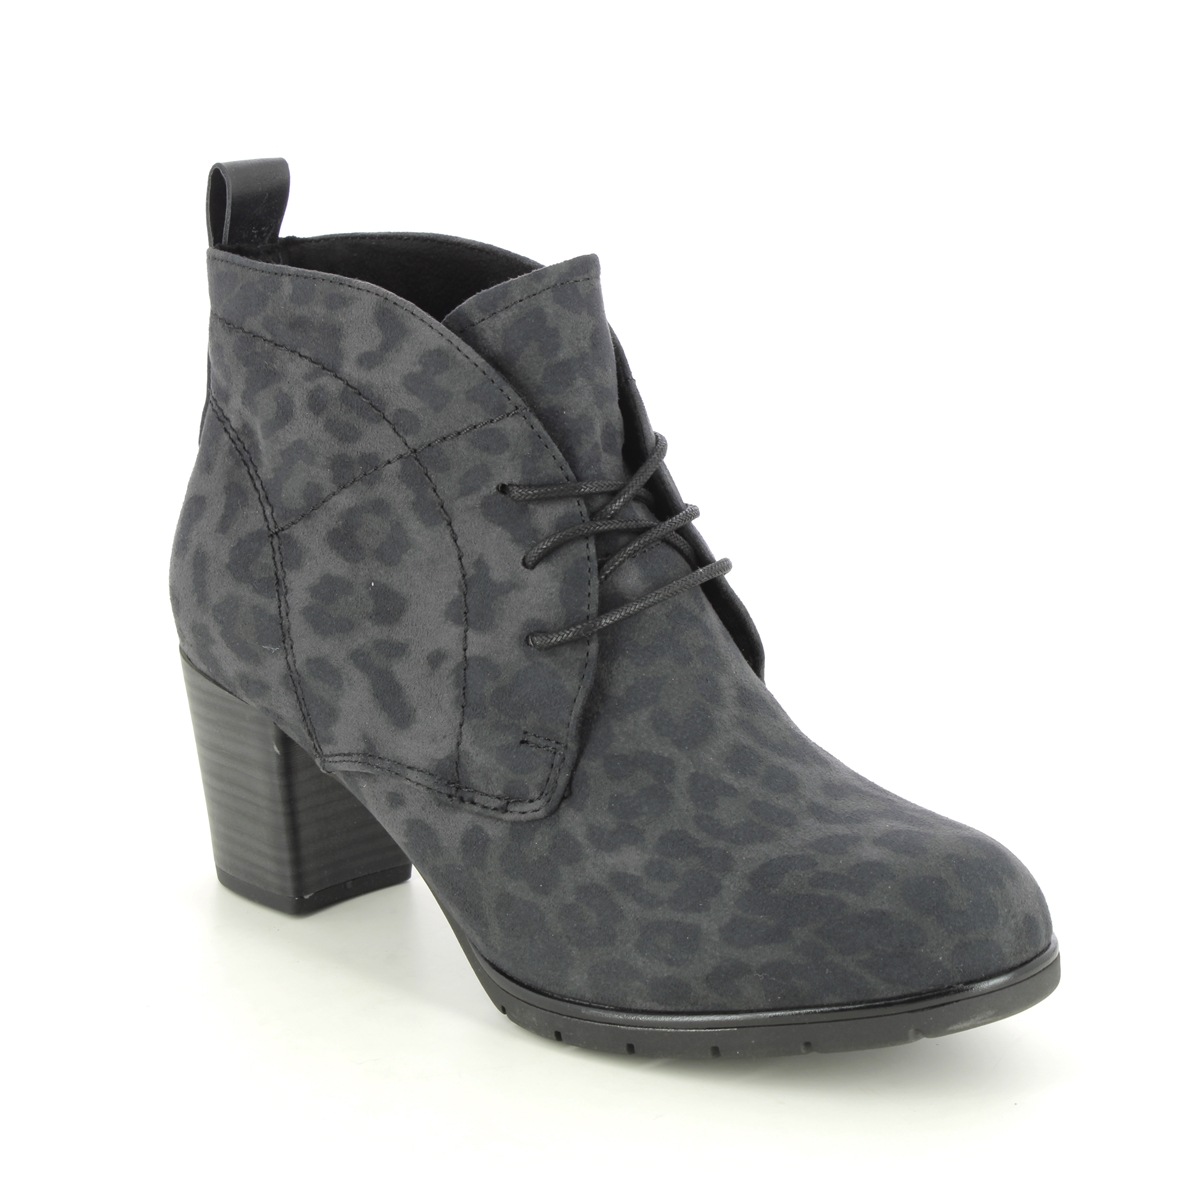 Marco Tozzi Pesalow Dark grey Womens Heeled Boots 25107-41-934 in a Plain Textile in Size 39